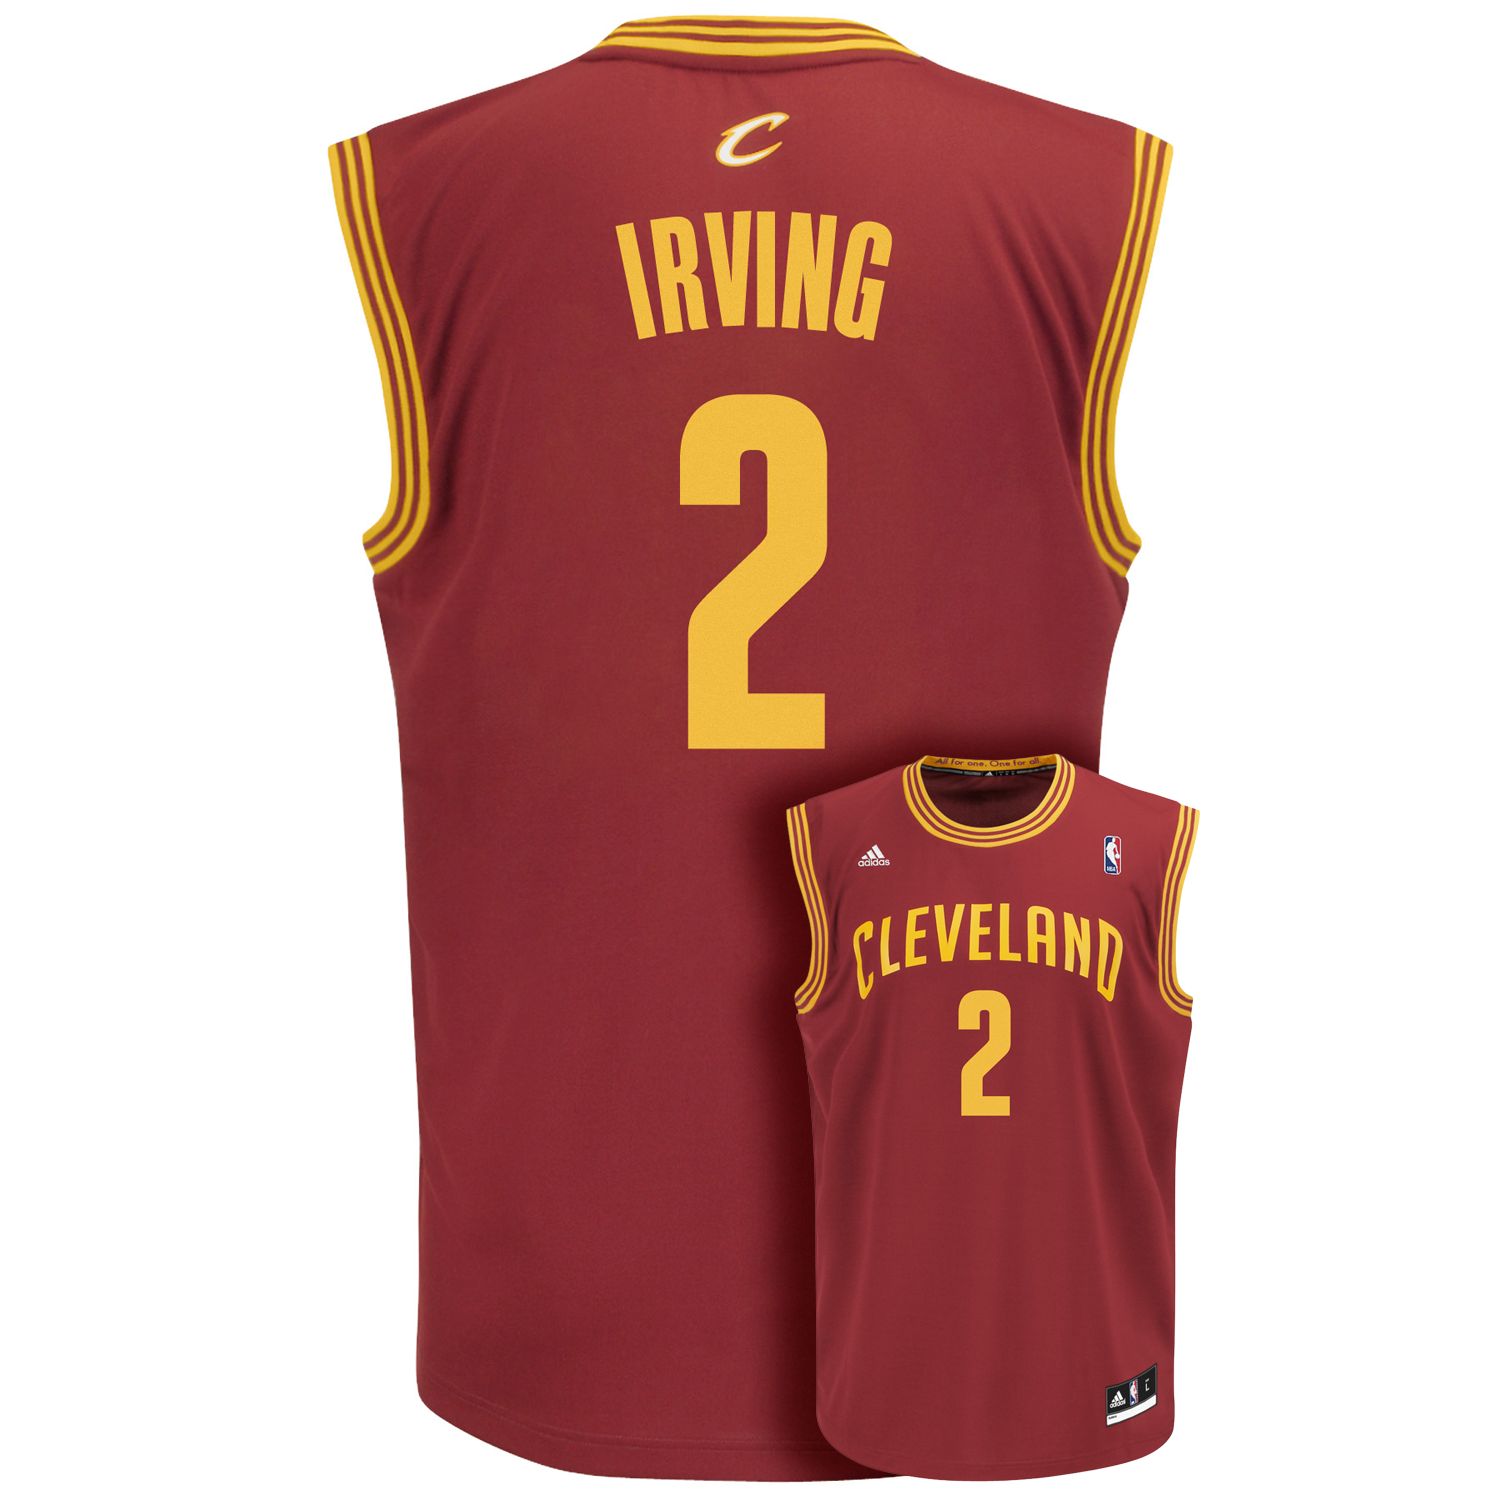 Cleveland Cavaliers Kyrie Irving NBA Jersey